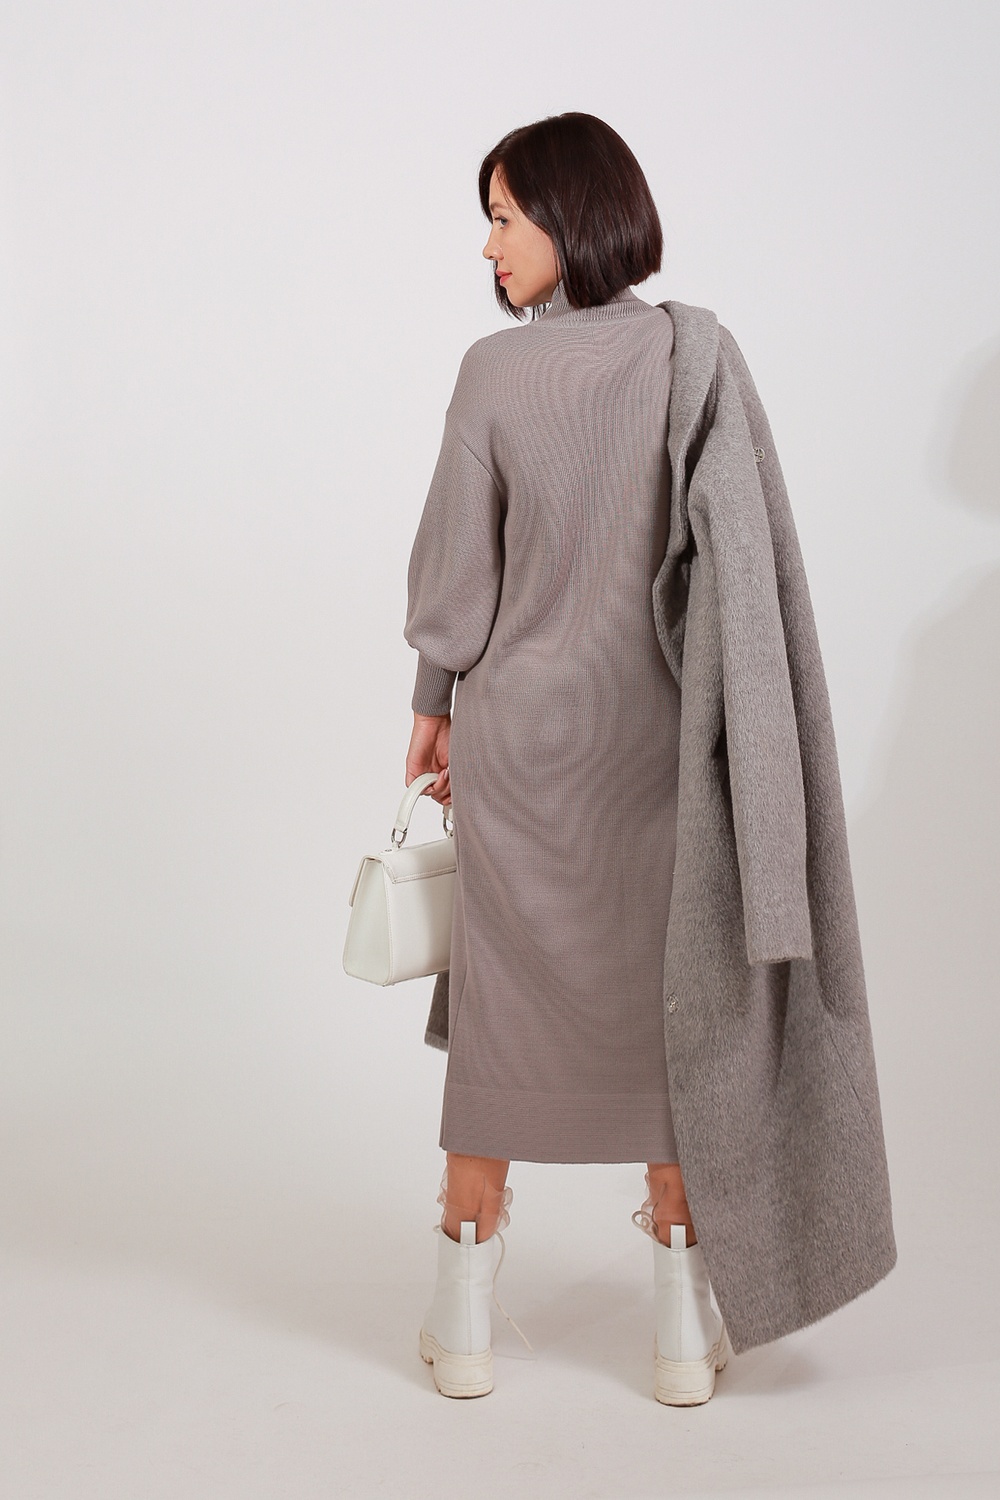 Dress knitted with a high neck from a merino wool